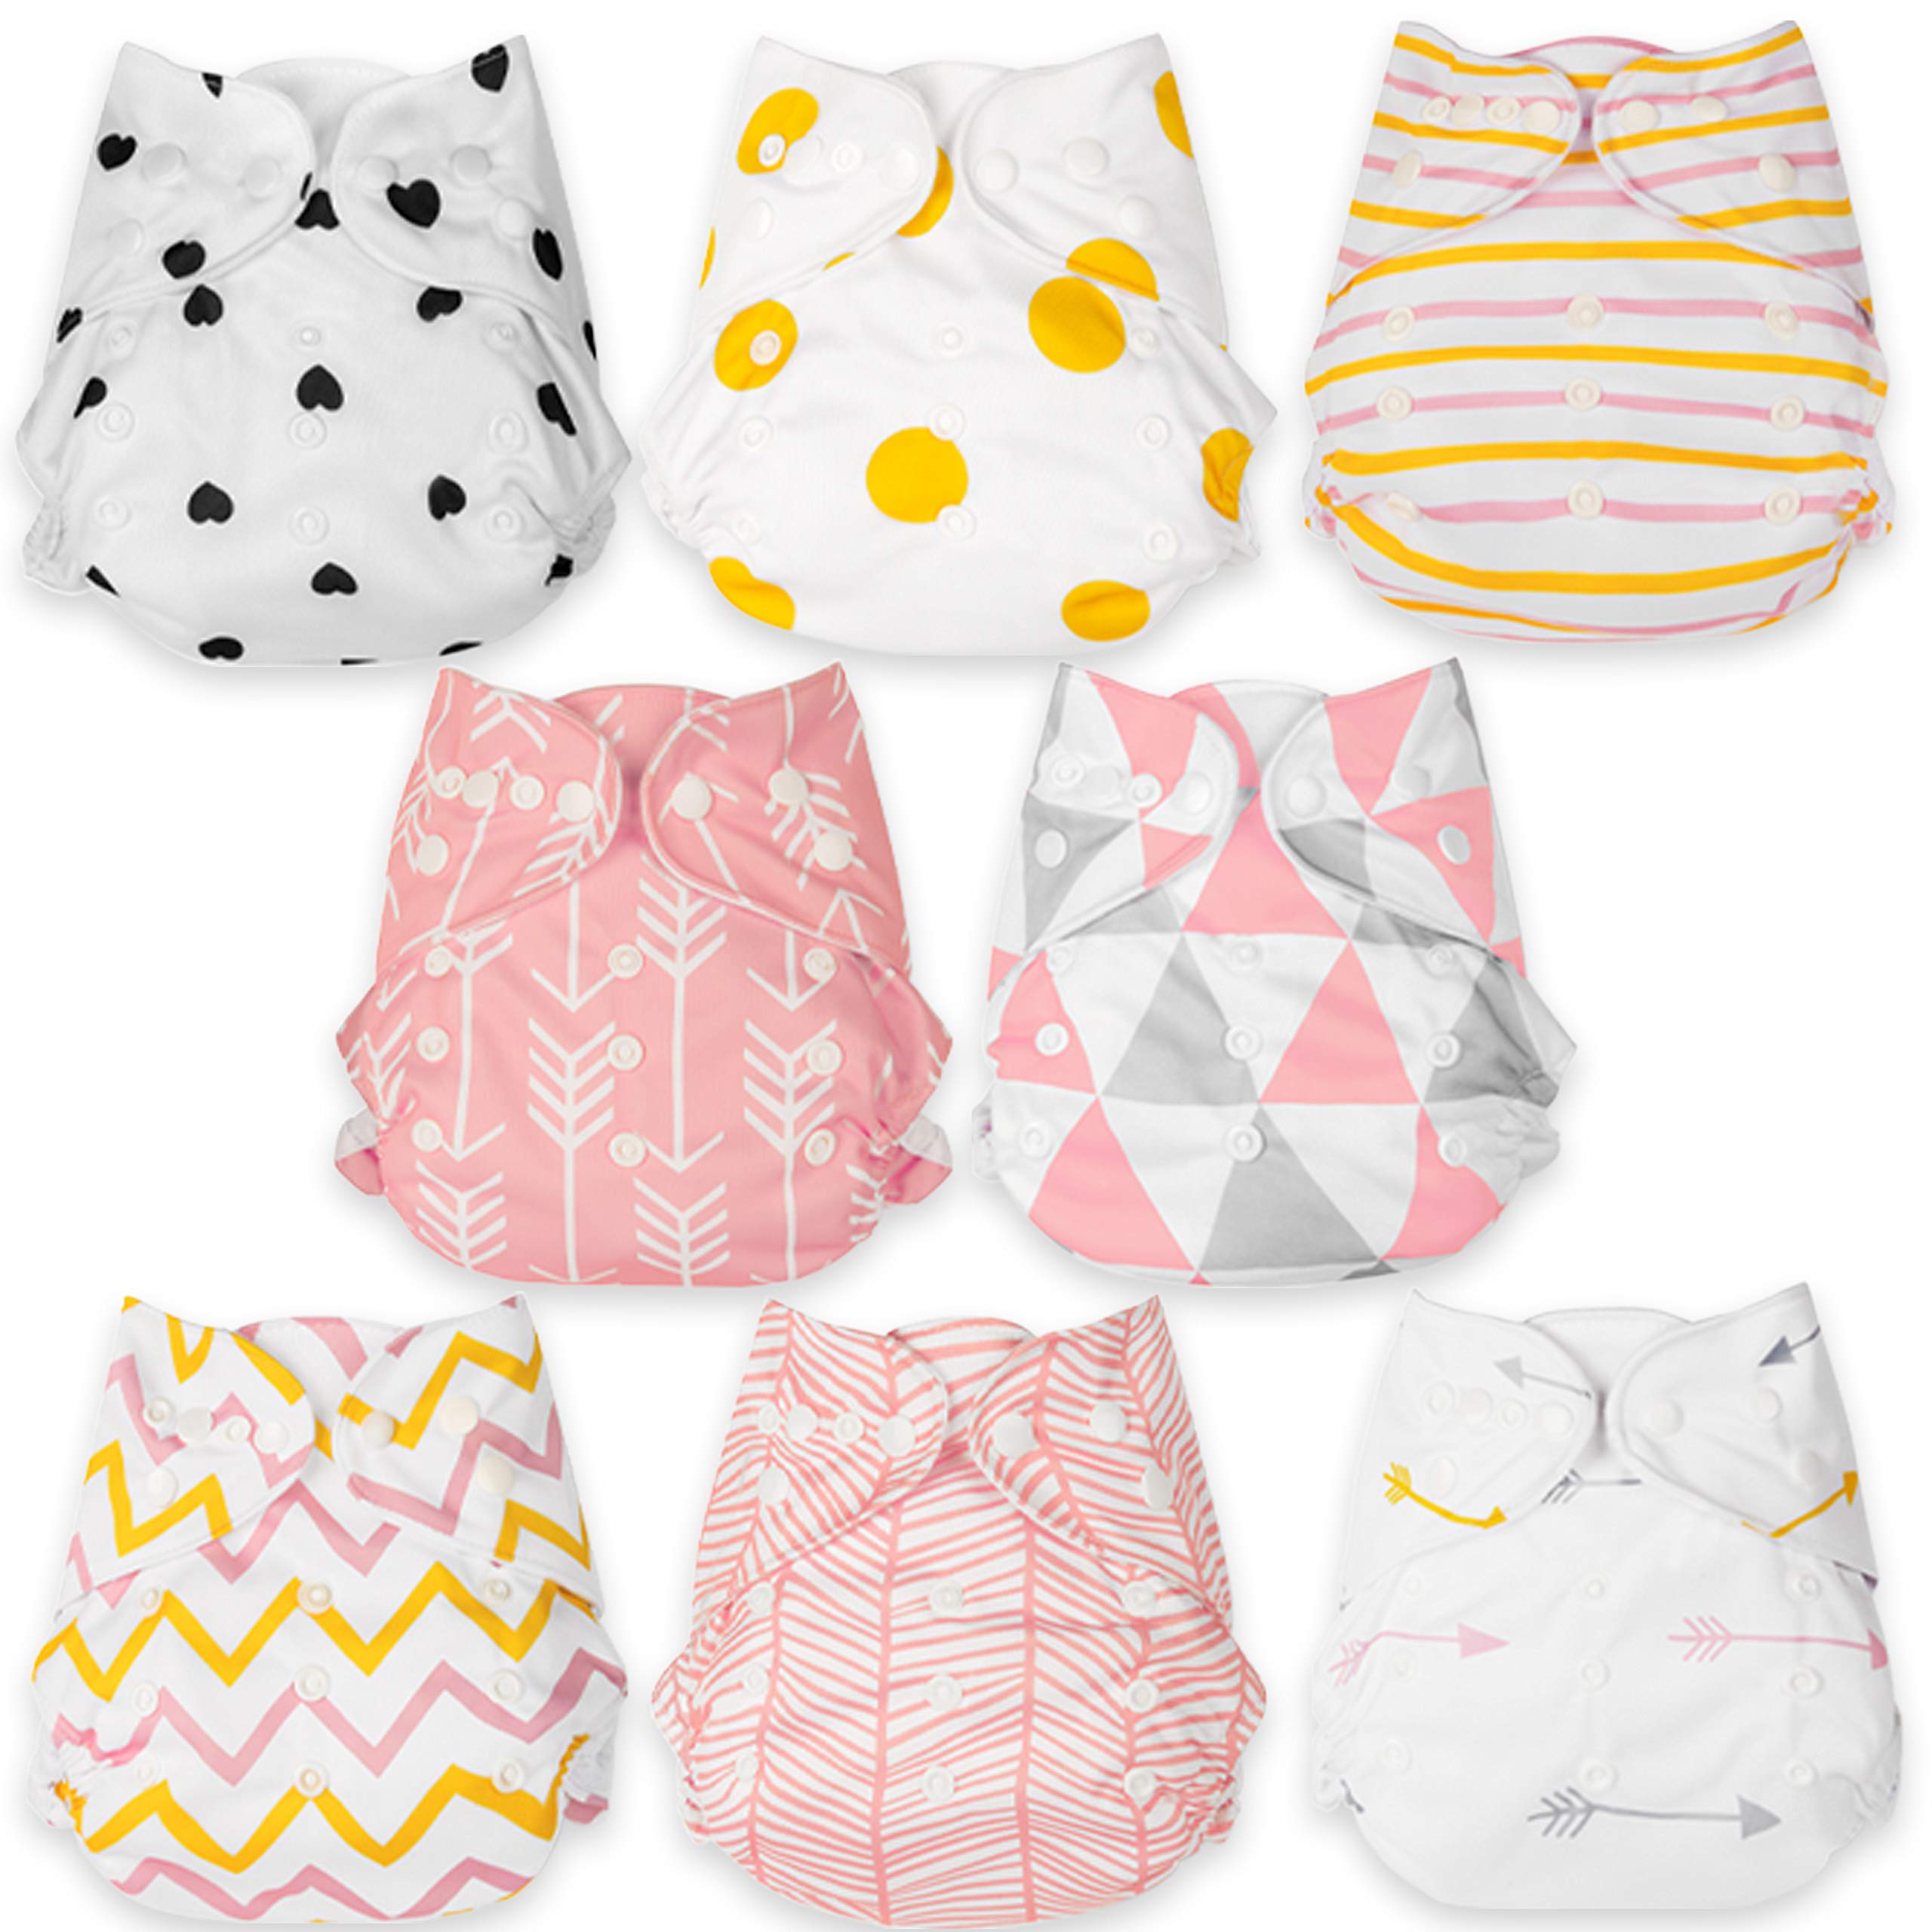 BaeBae Goods Adjustable Cloth Diapers for Boys and Girls – 8 Reusable Cloth Diapers for Babies with 8 Cloth Diaper Inserts (Pink Triangles)